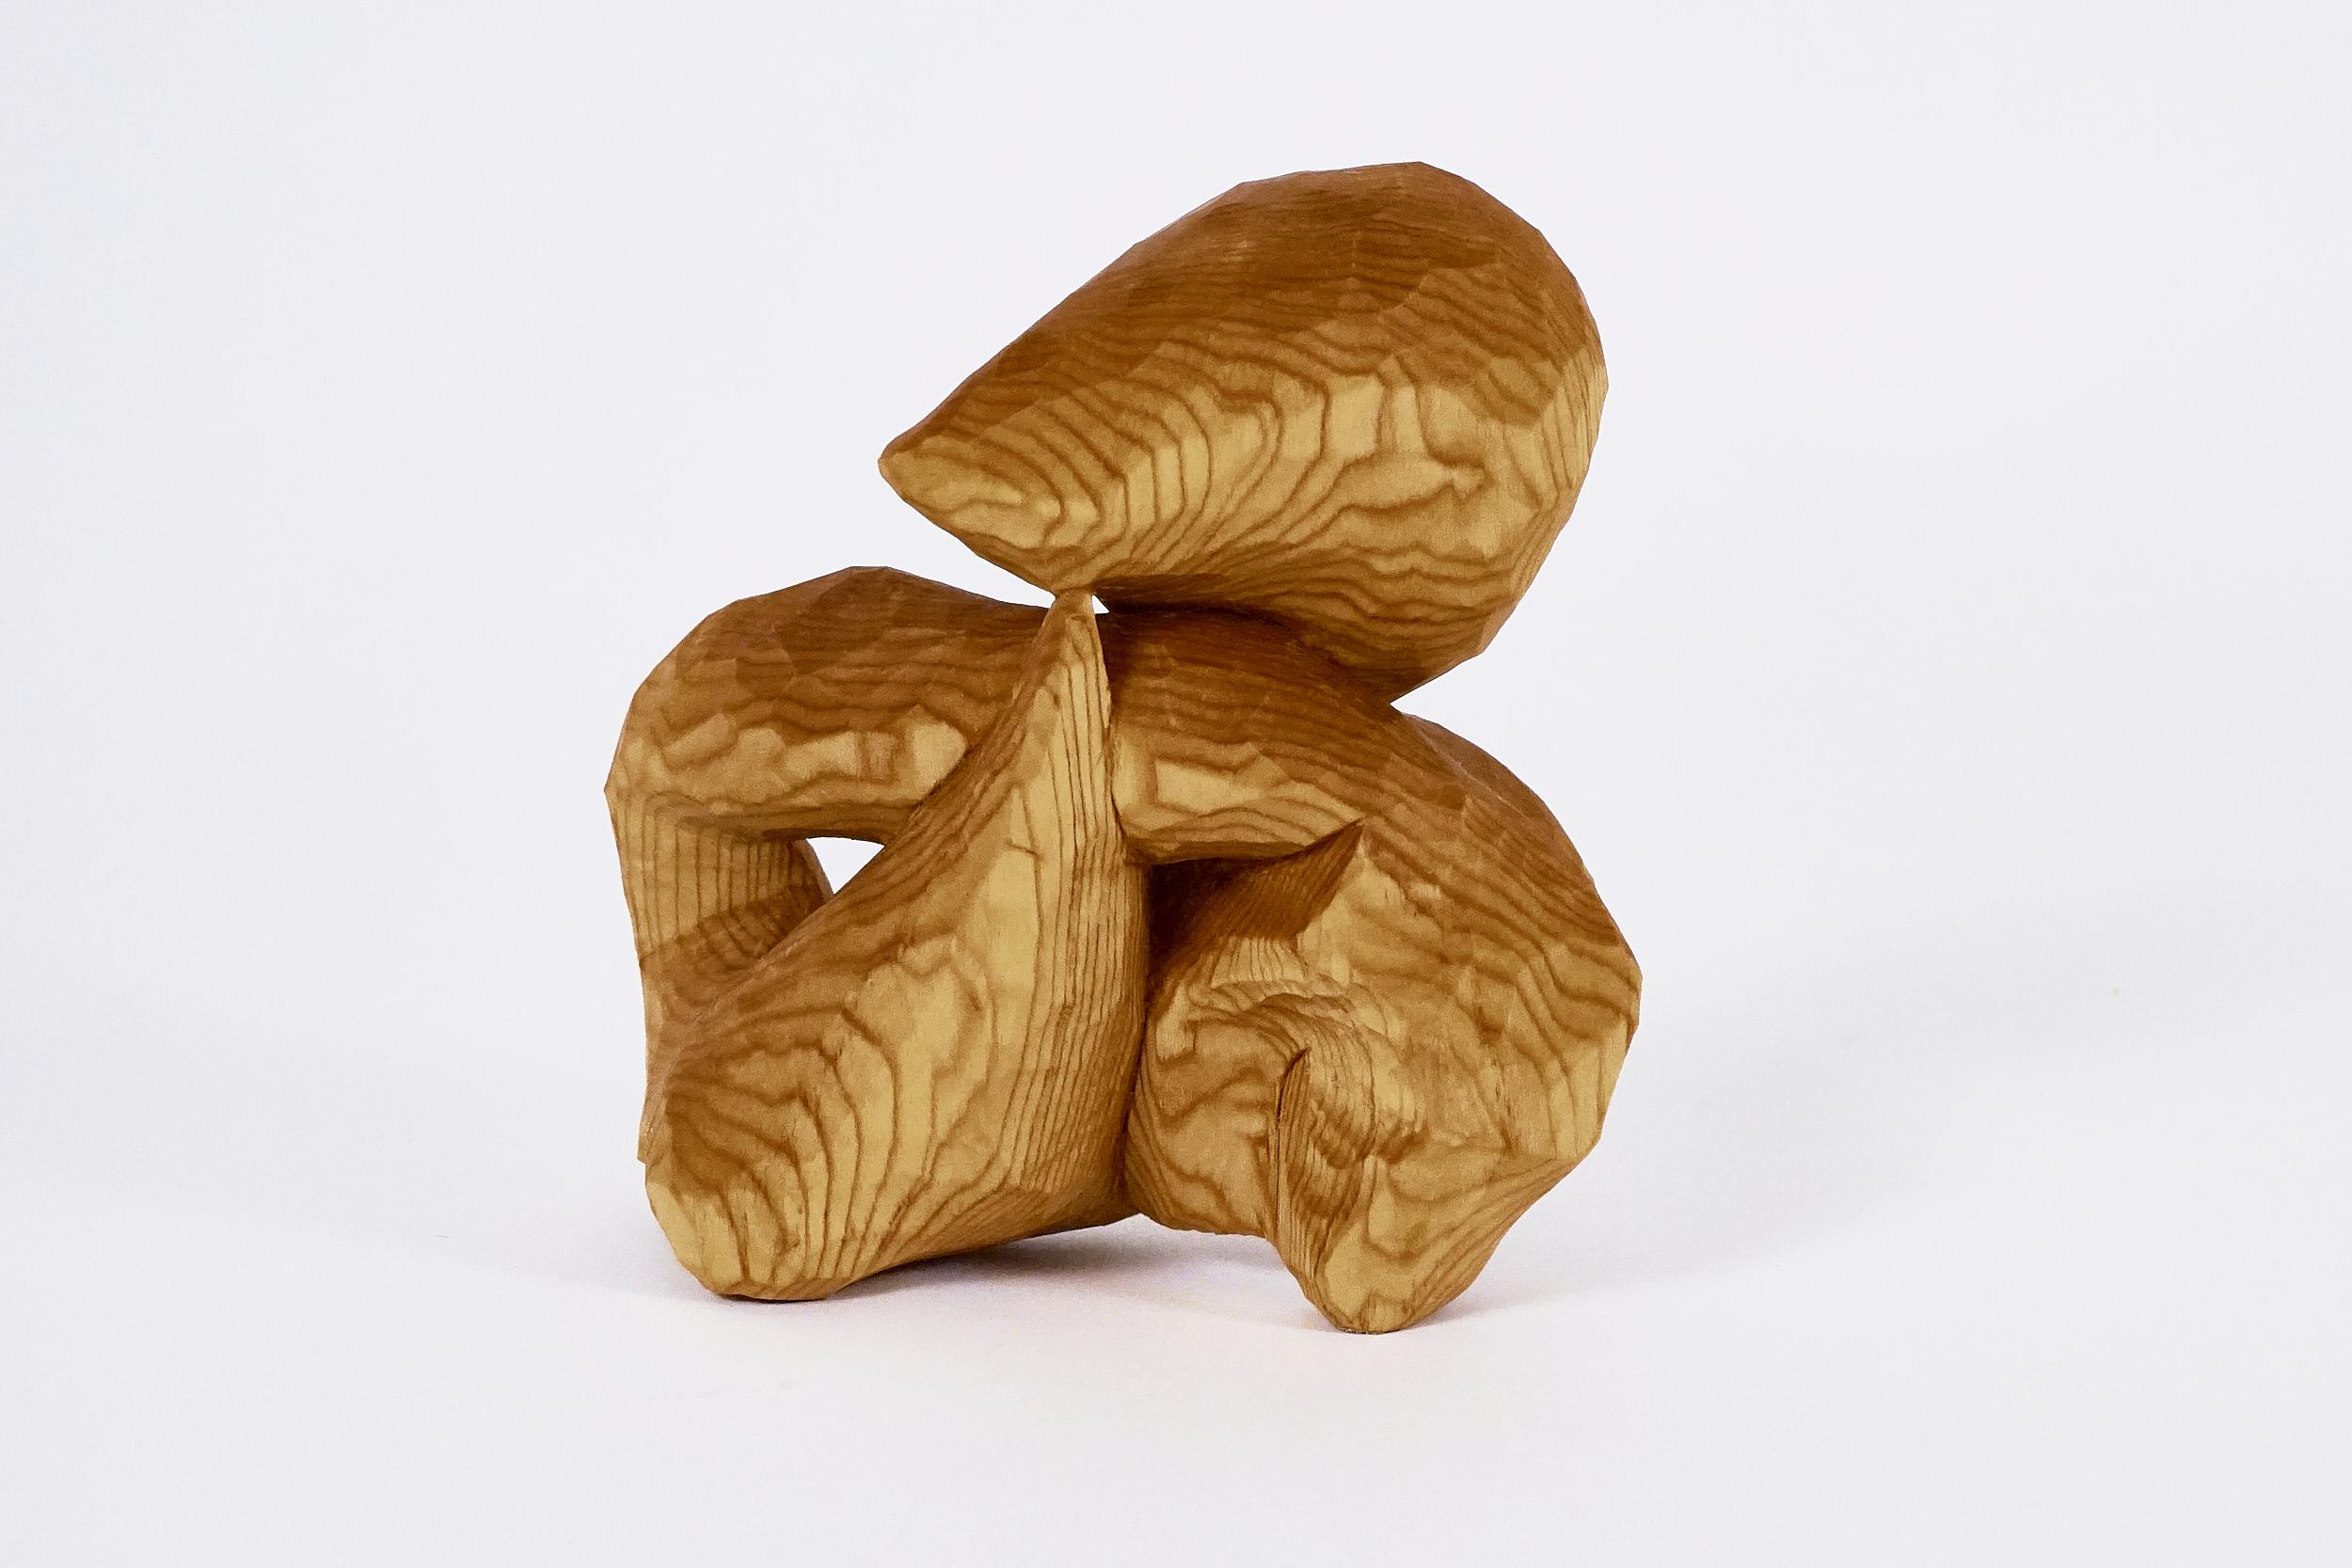 Carved Investigation Ten, Carved wood sculpture - Contemporary Sculpture by Jared Abner